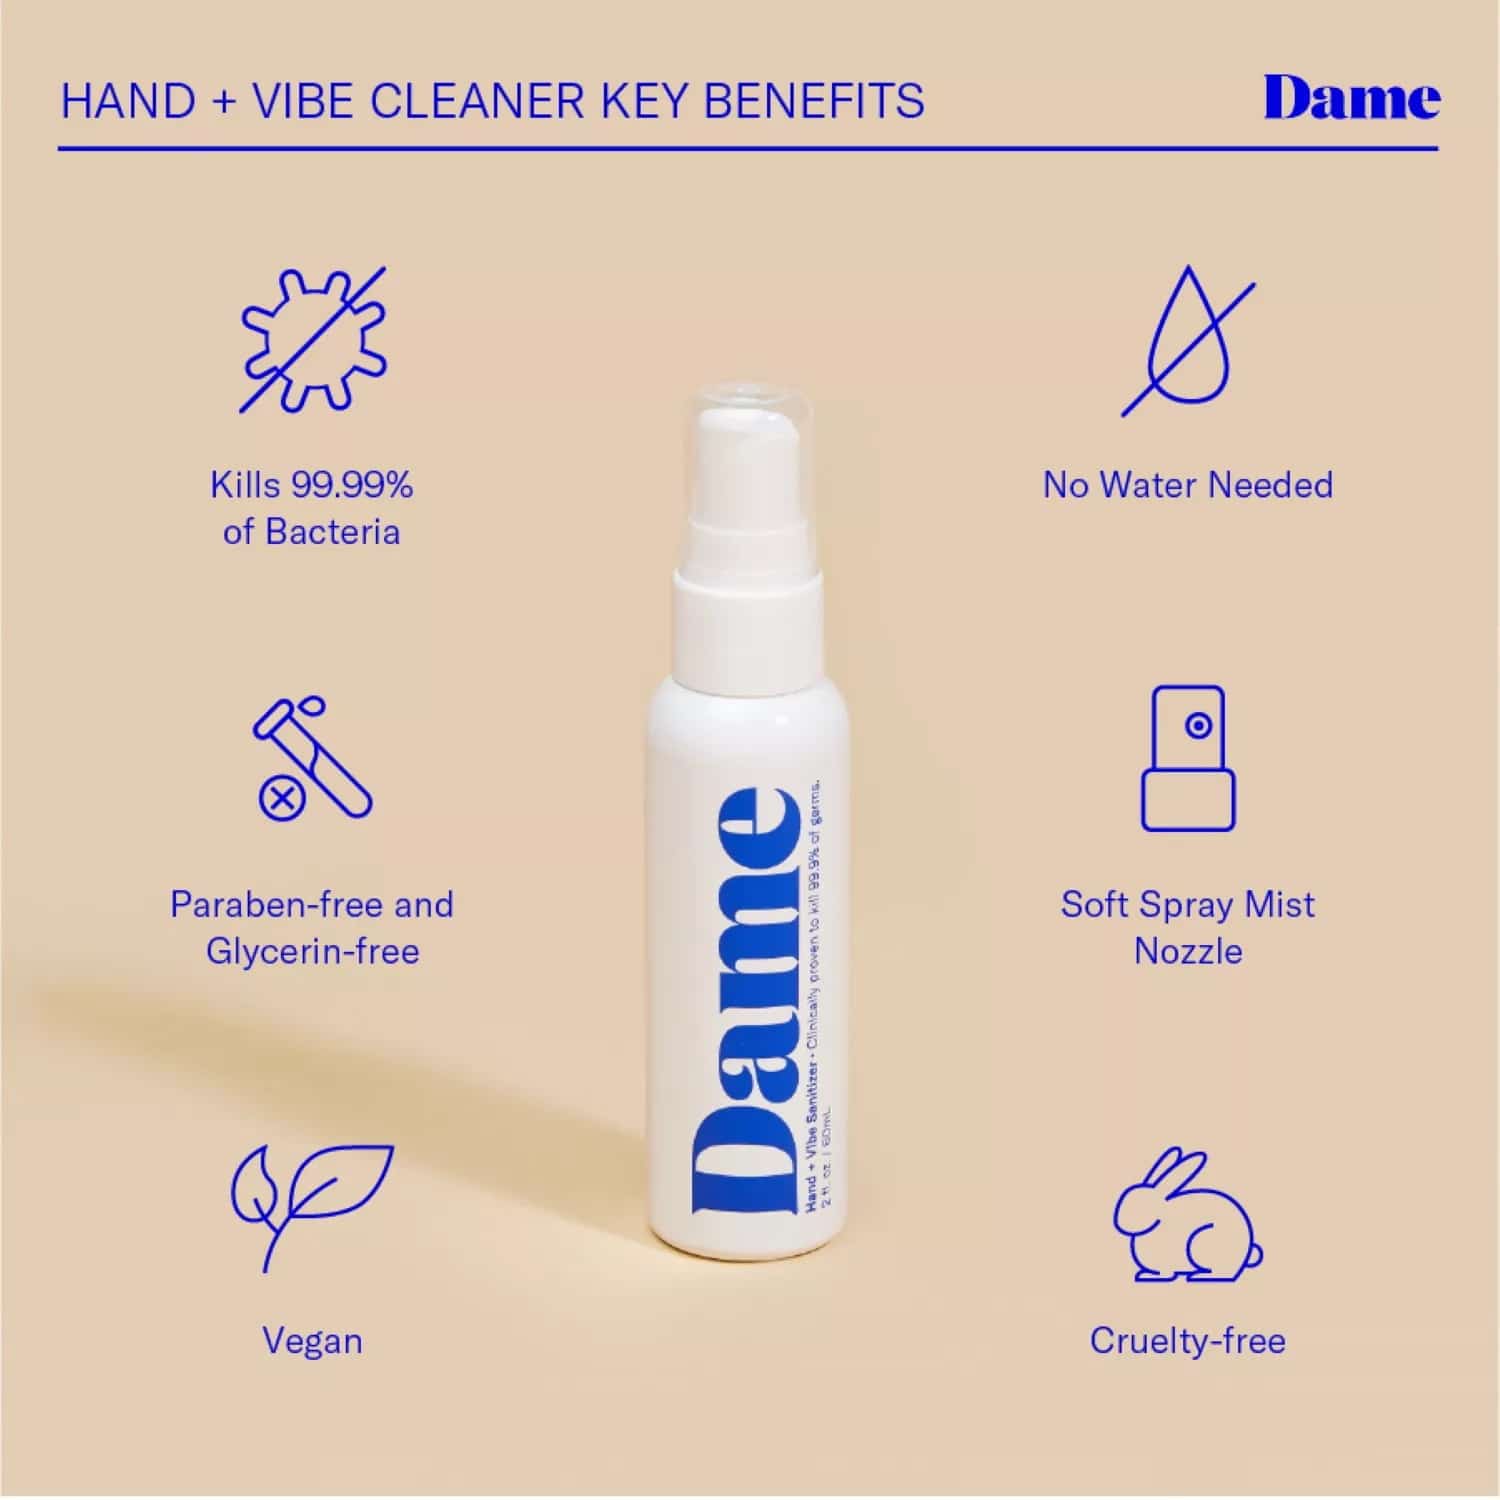 Hand & Vibe Cleaner 60 ml features